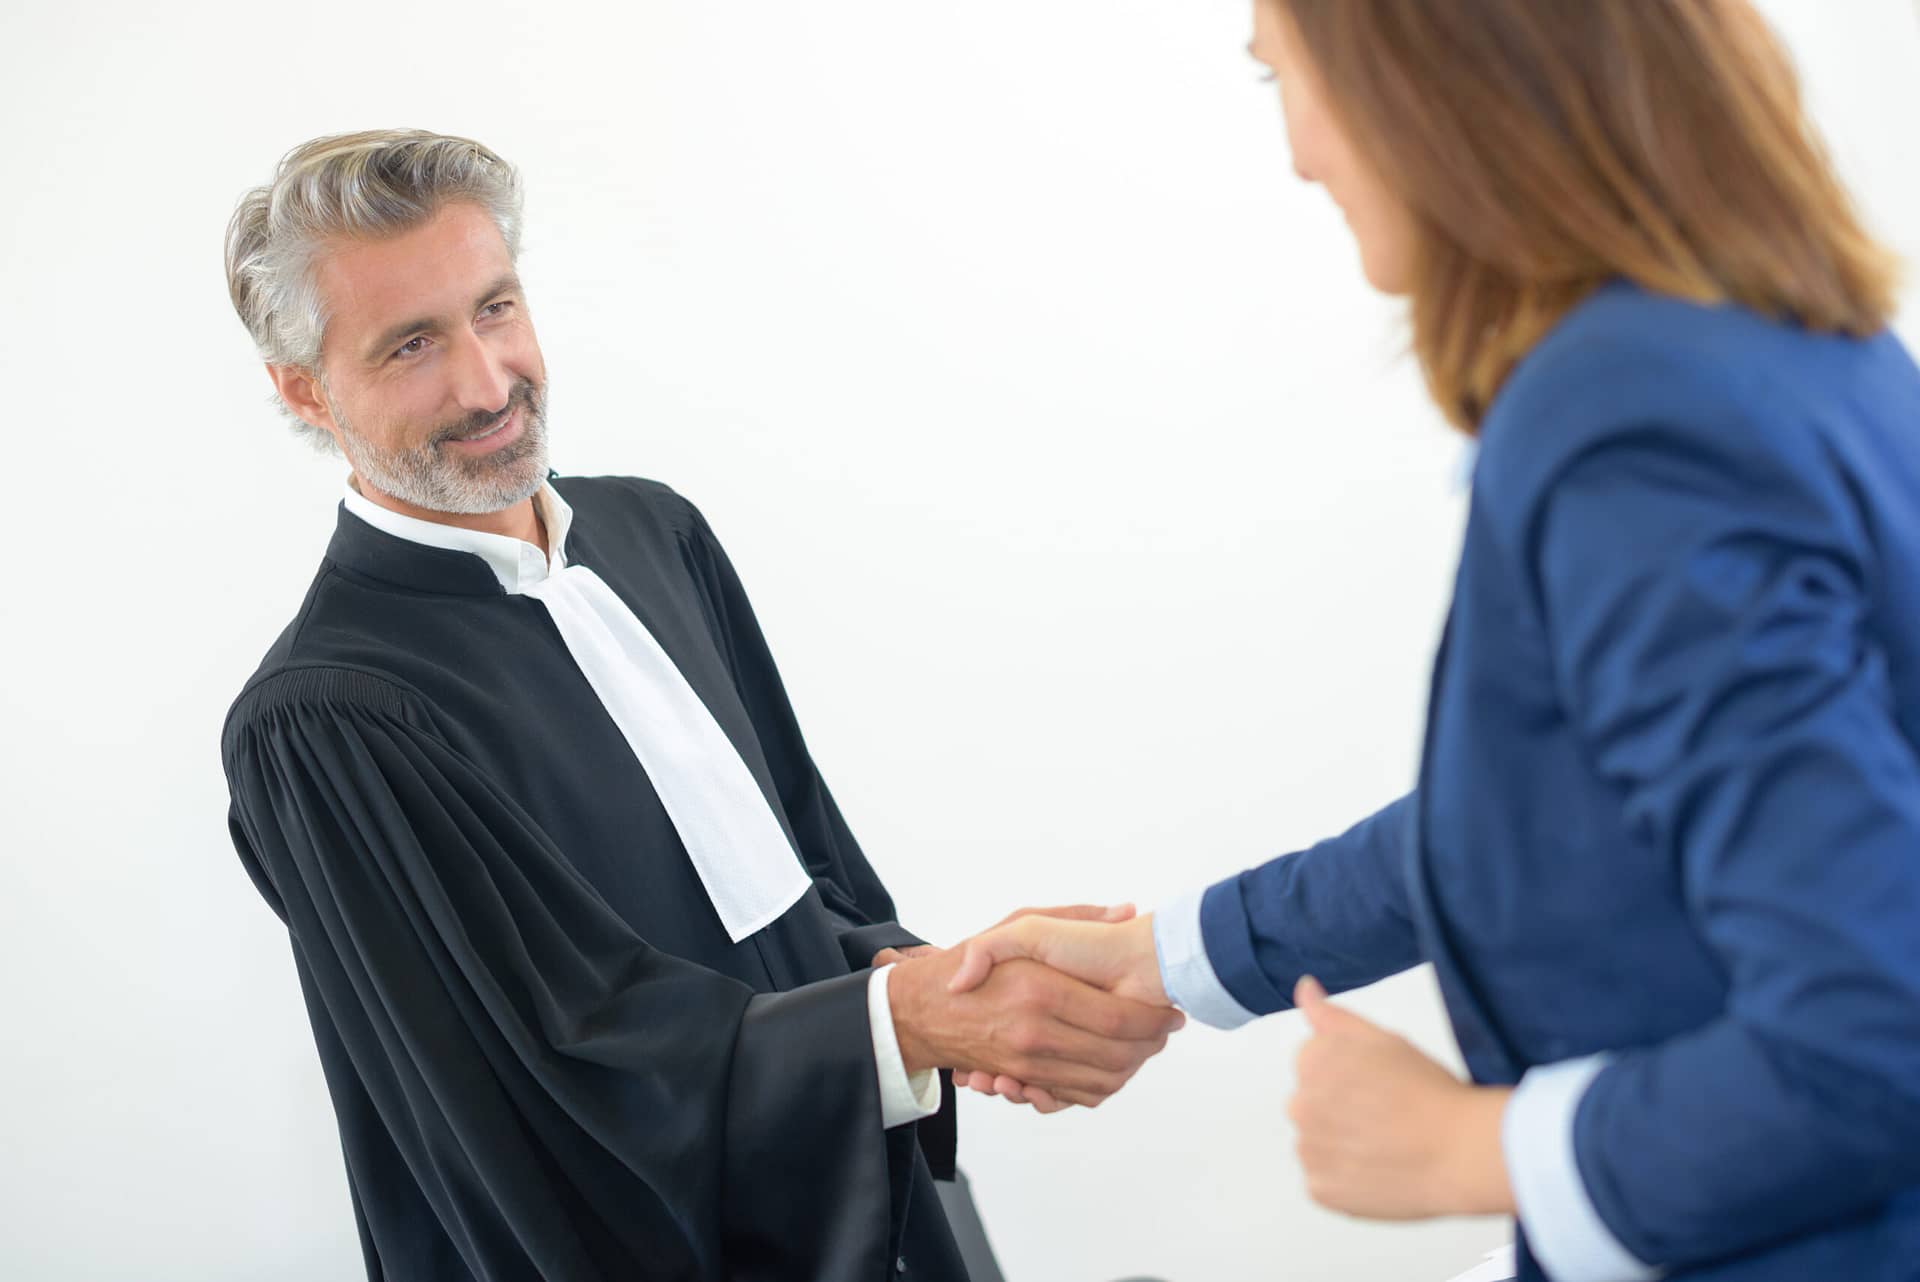 Legal worker in robes shaking hands with woman in suit. Legal counsel